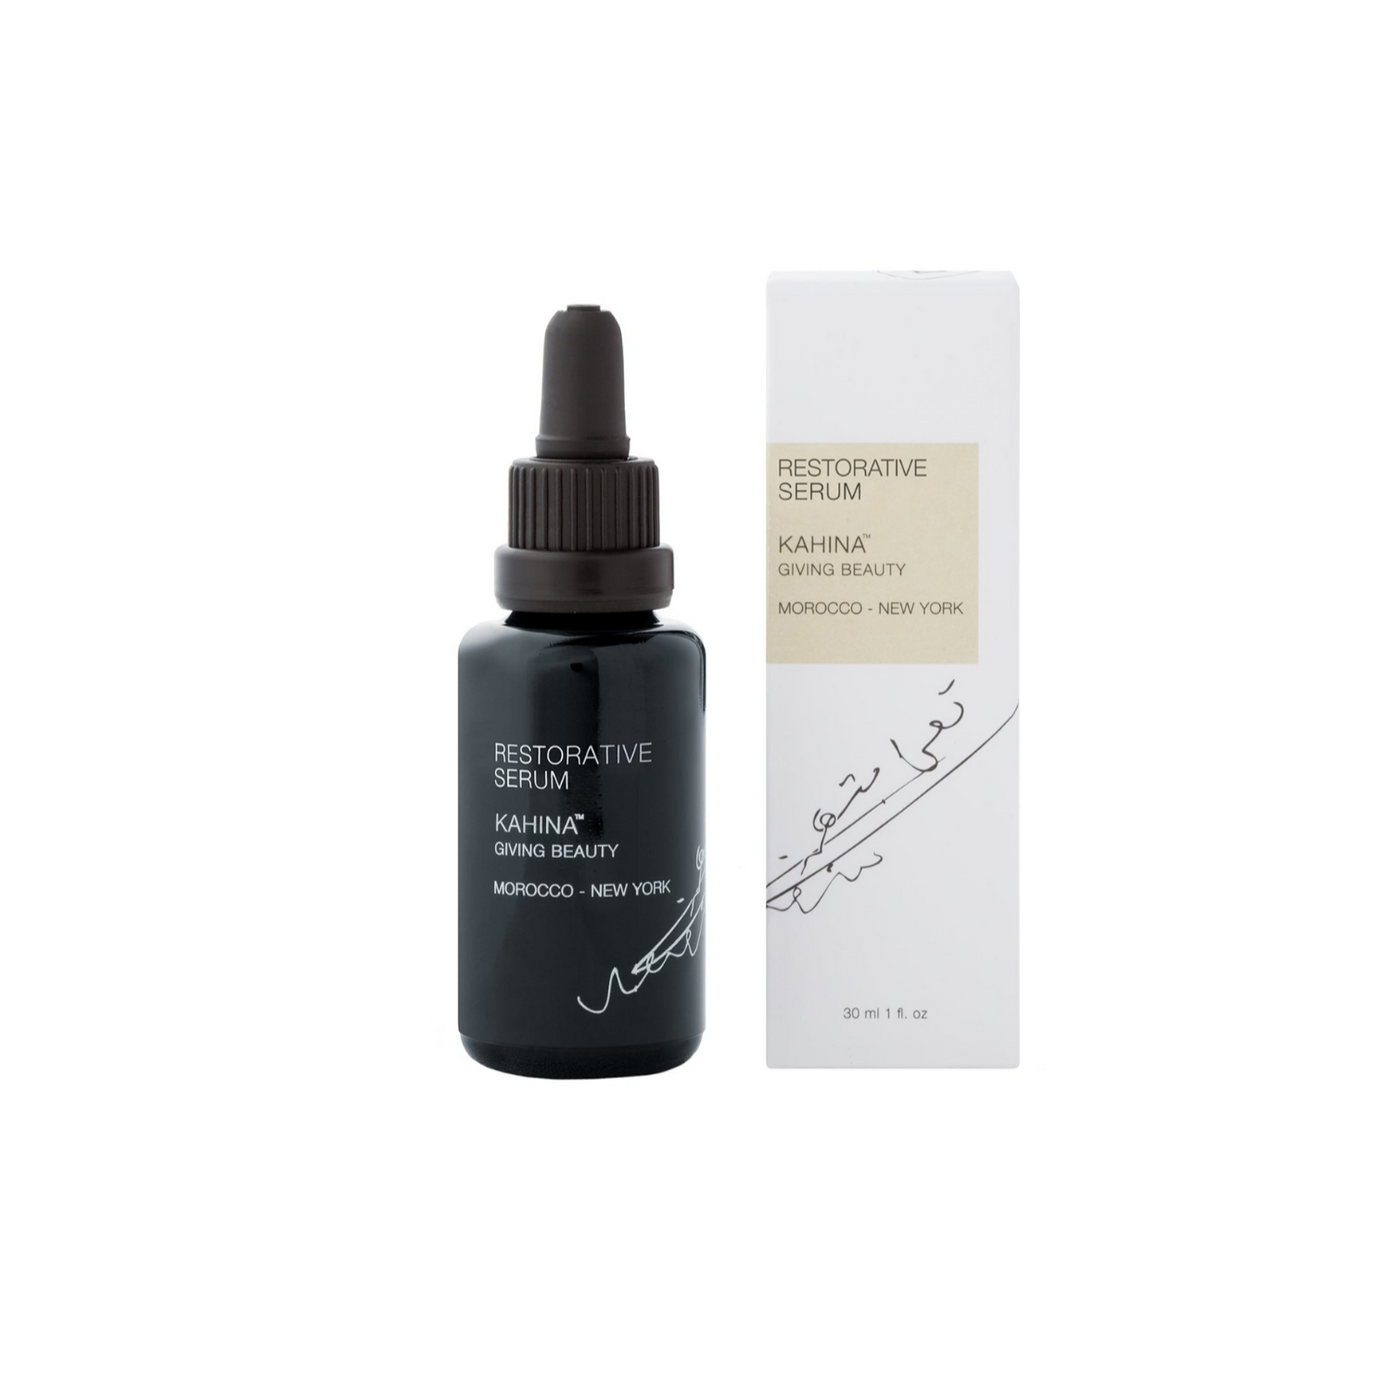 Laurel and Reed Clean Beauty Store featuring Kahina Giving Beauty Restorative Serum